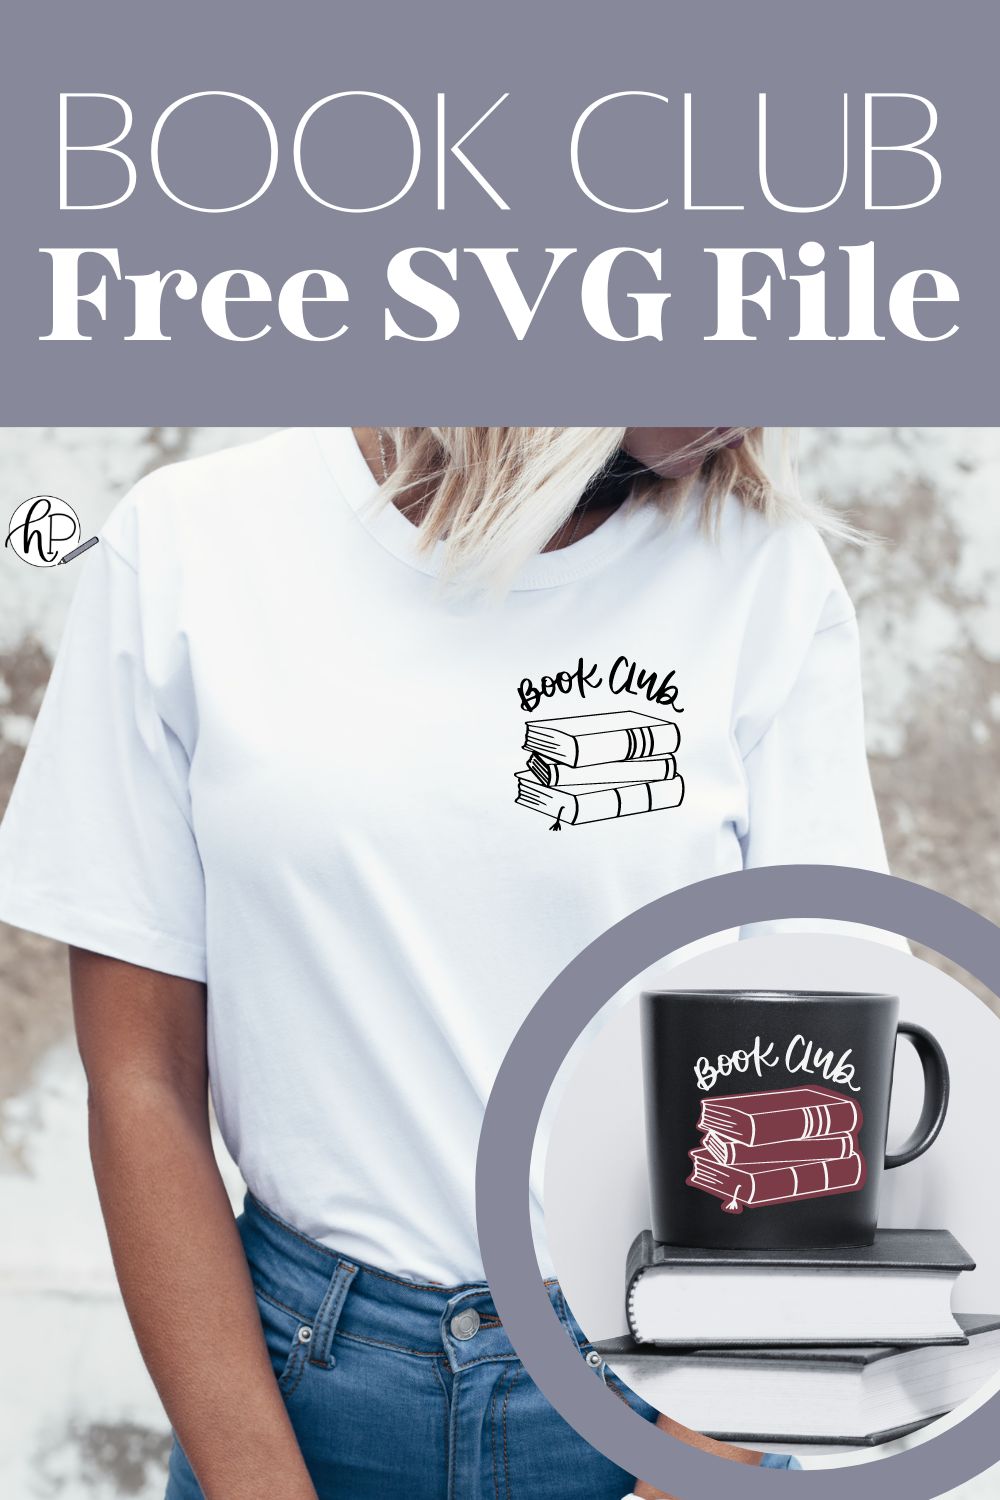 Book Club Free SVG File (text title above images) image of t-shirt with the books stacked and hand lettered 'book club' design ironed on with black vinyl where the pocket would go. Image overlay of mug with book club layered SVG design in burgundy and white